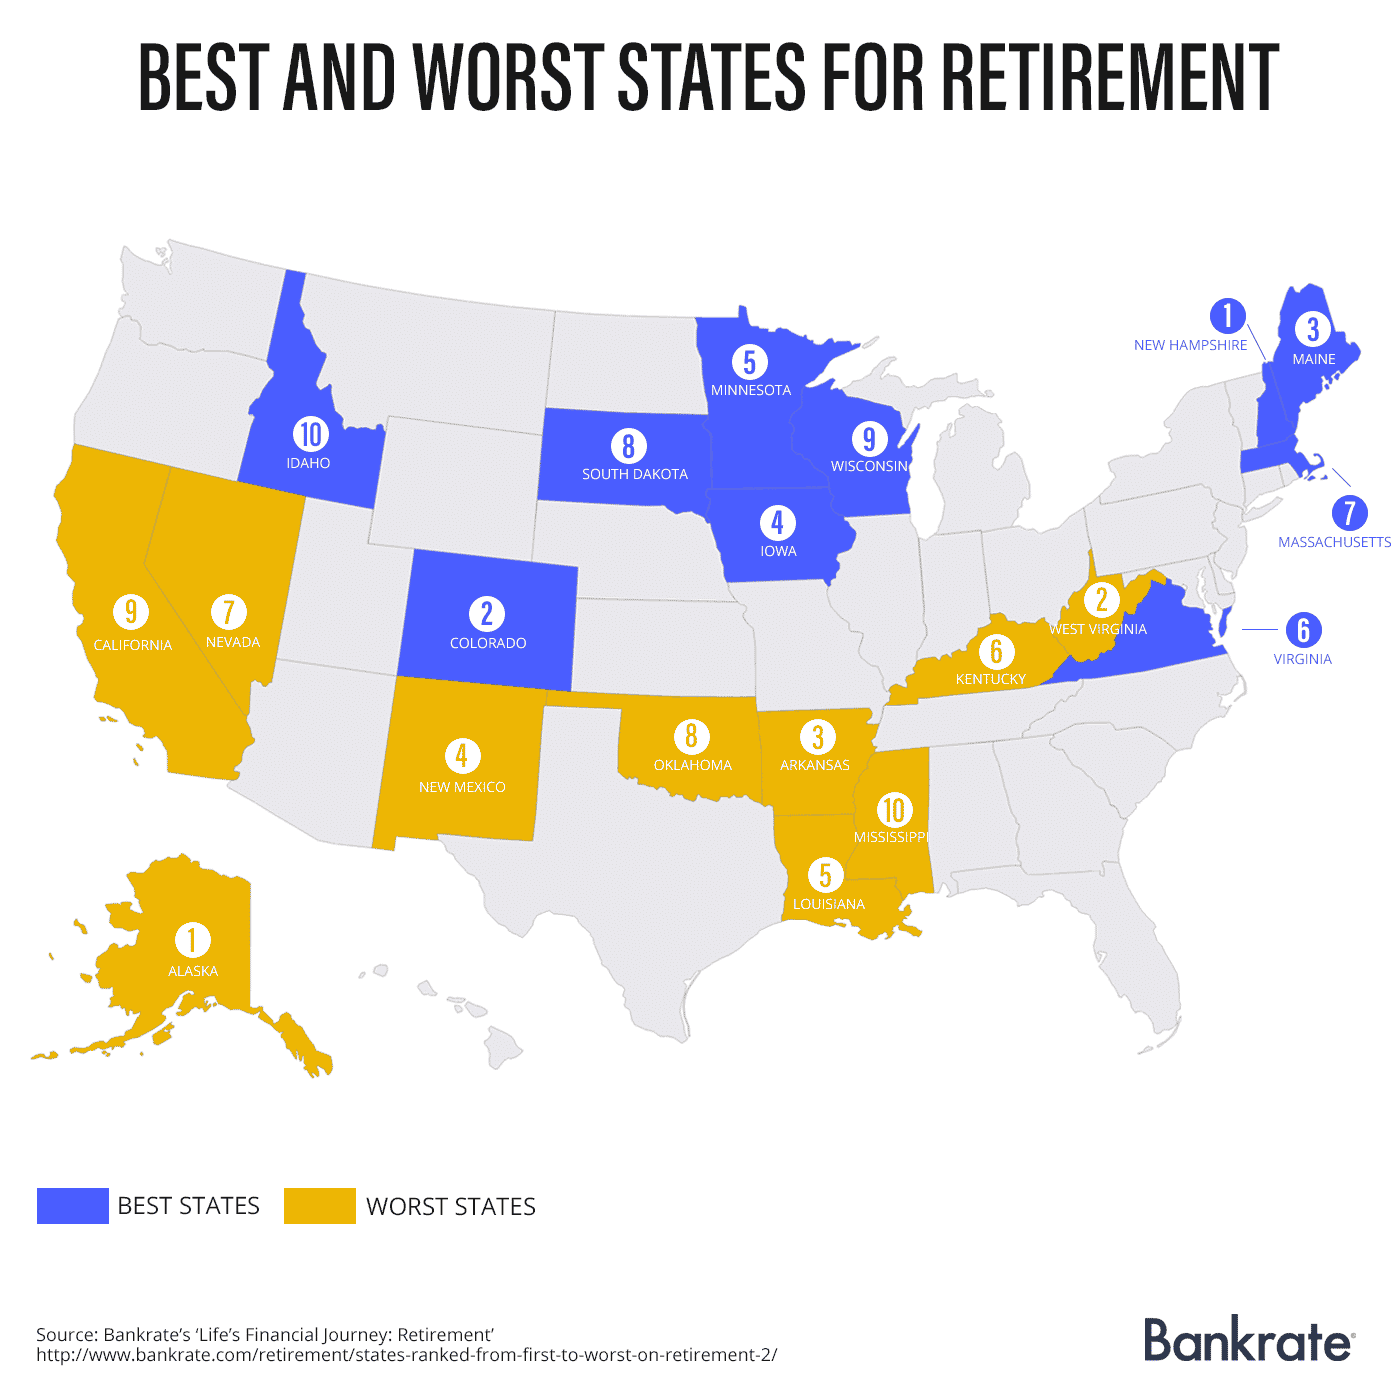 Where Are The Best And Worst States To Retire?